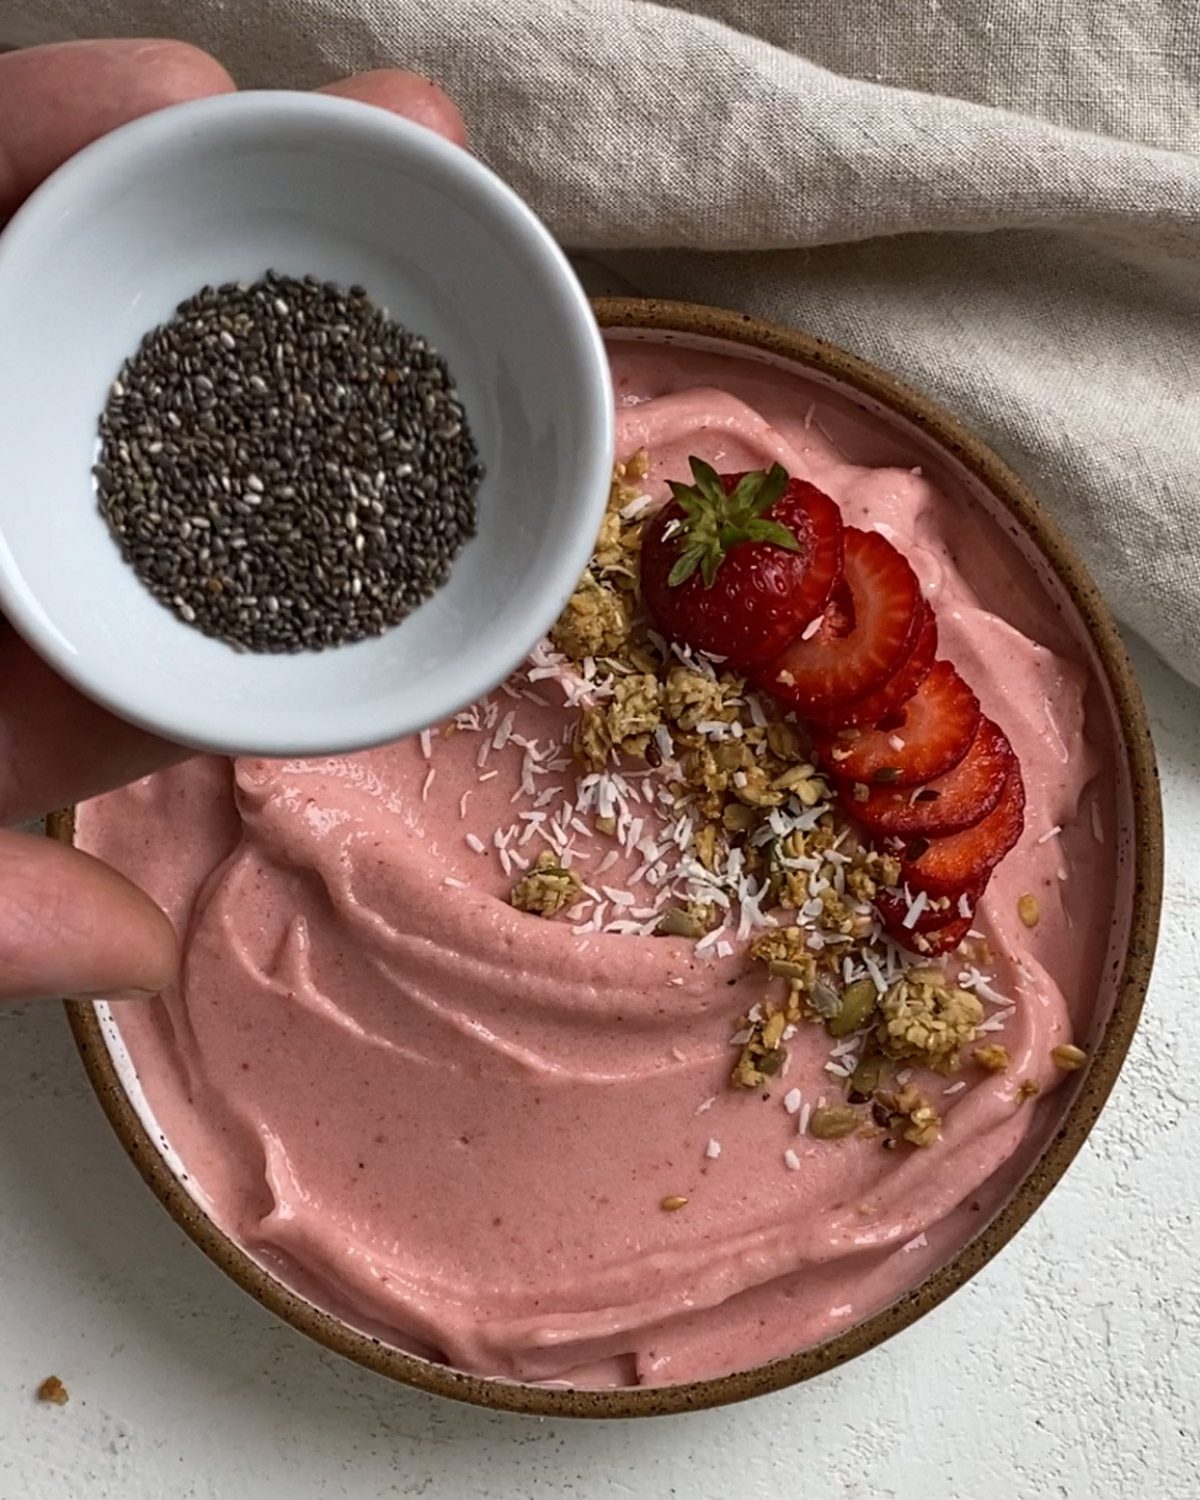 process of adding chia seeds to top the Strawberry Smoothie Bowl